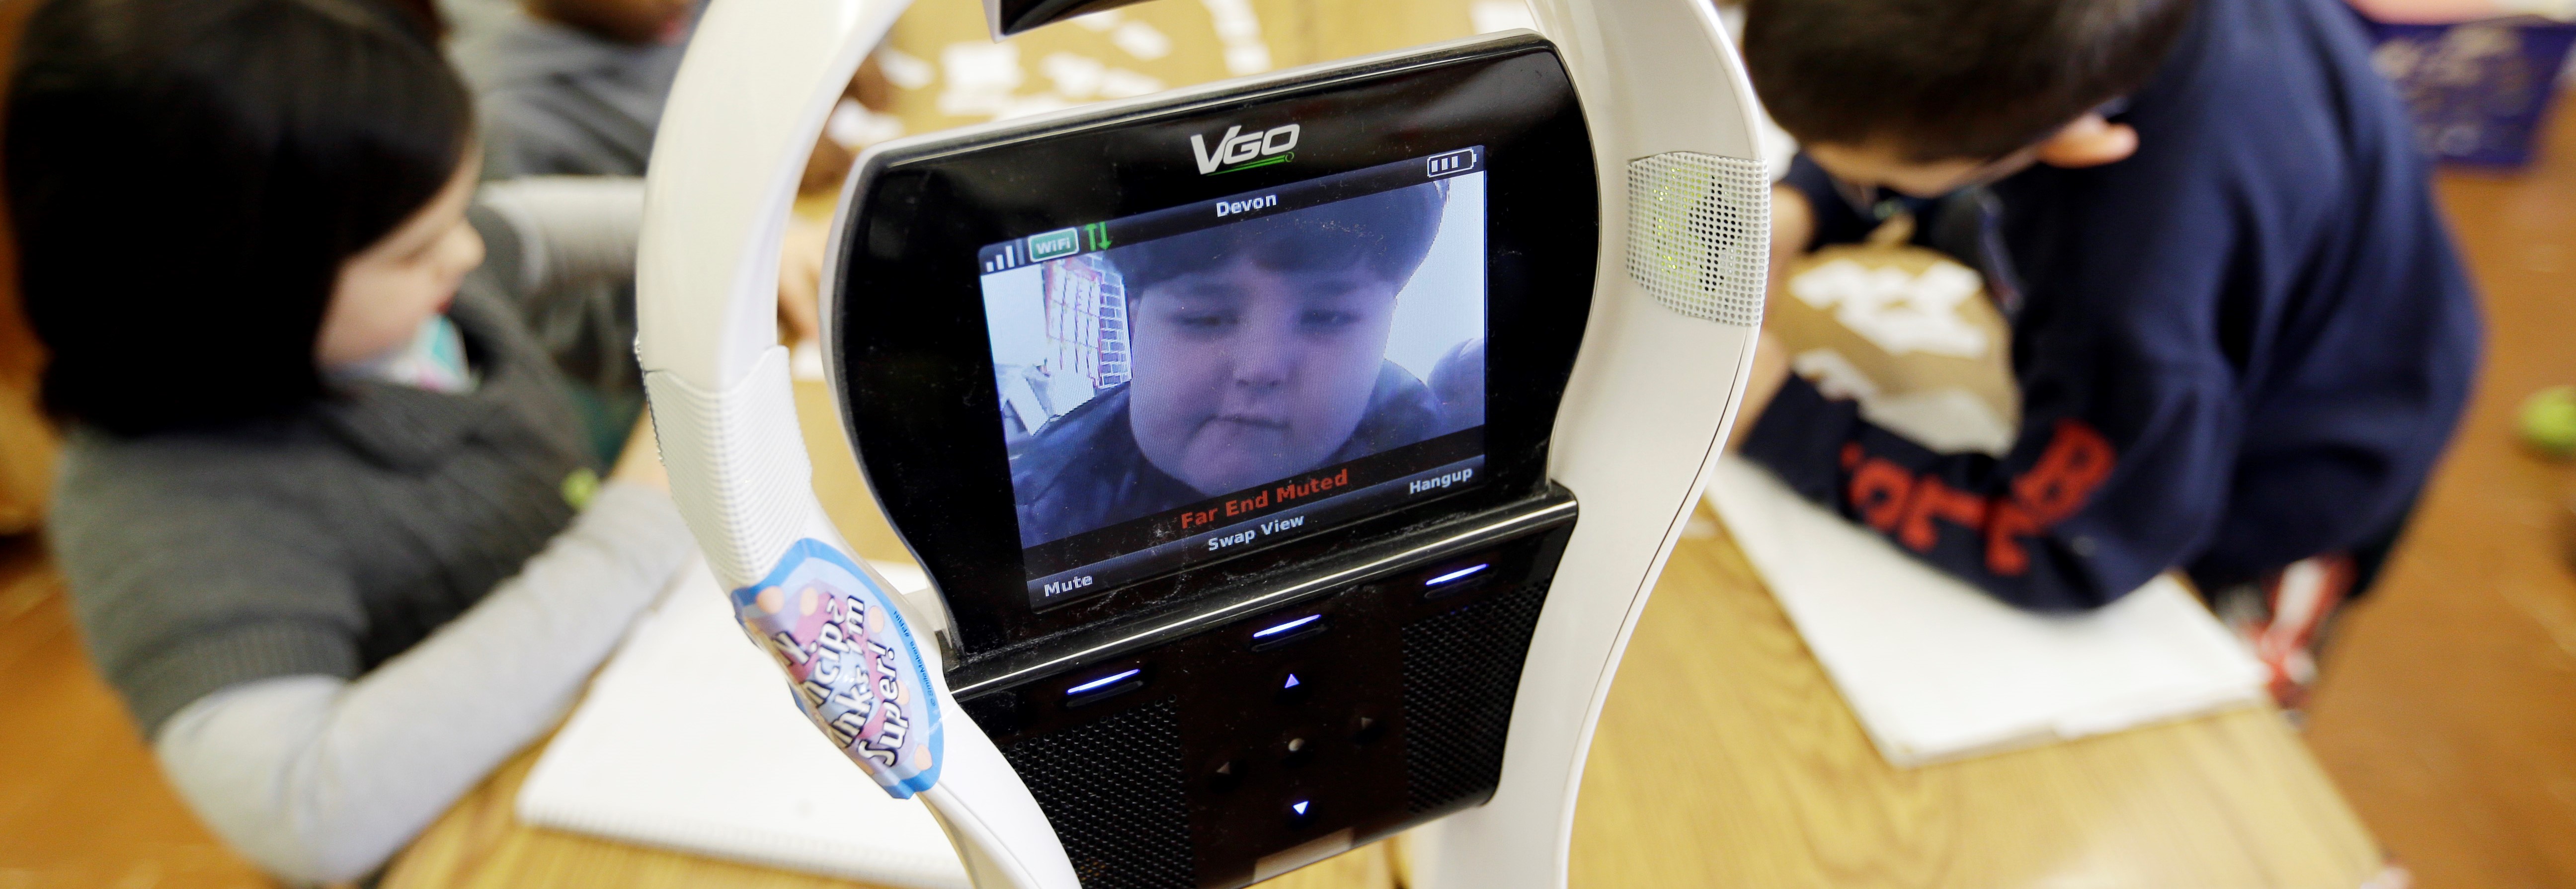 How robots could help chronically ill kids attend school